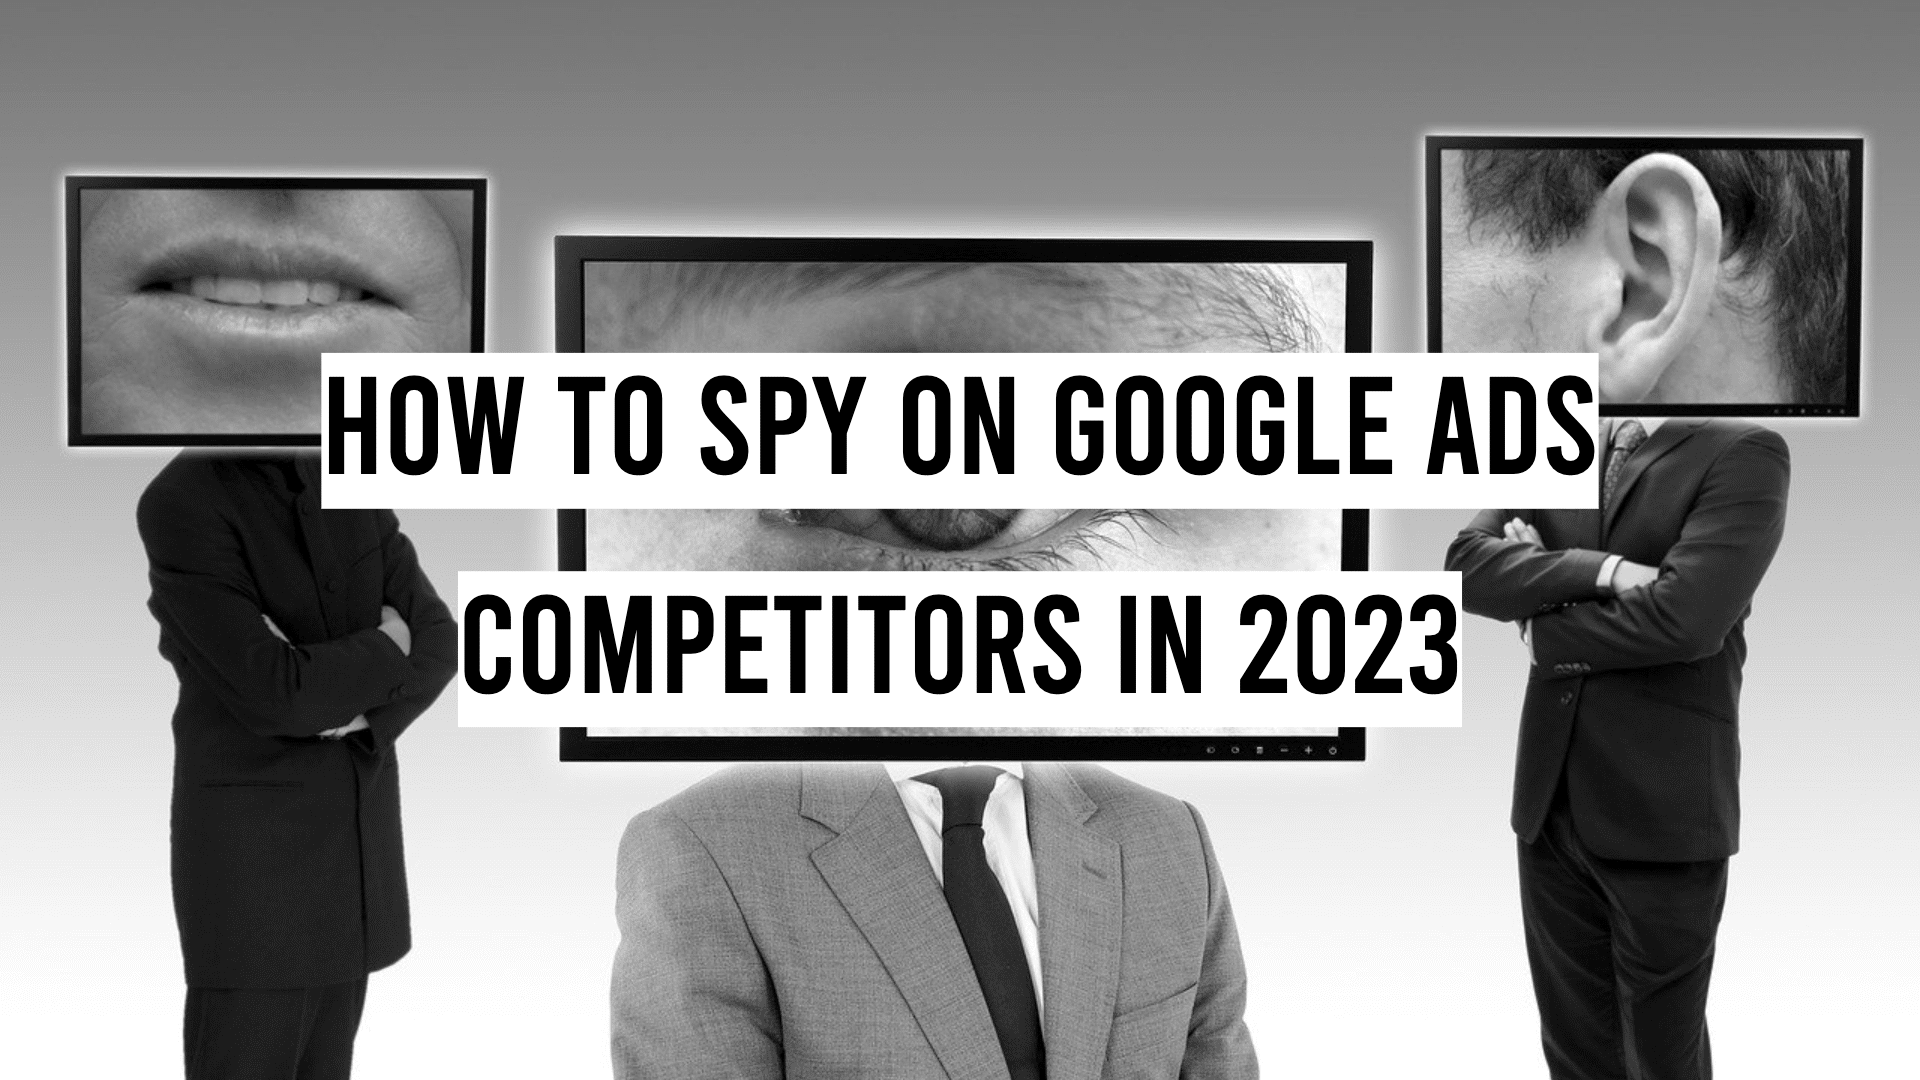 How to Spy on Google Ads Competitors